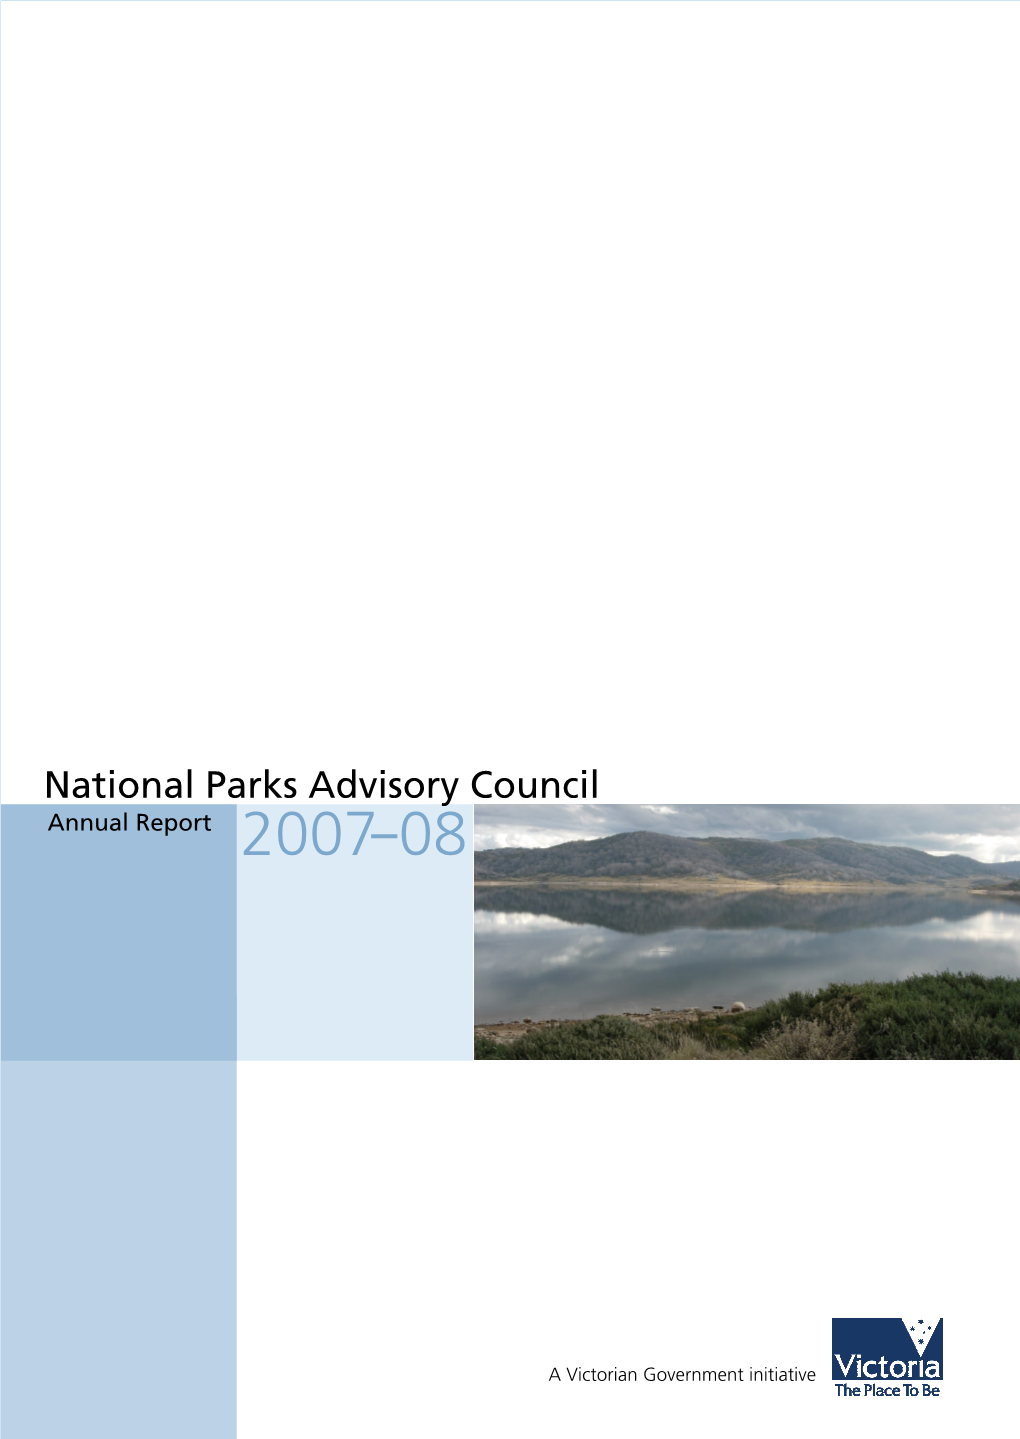 National Parks Advisory Council Annual Report 2007-08